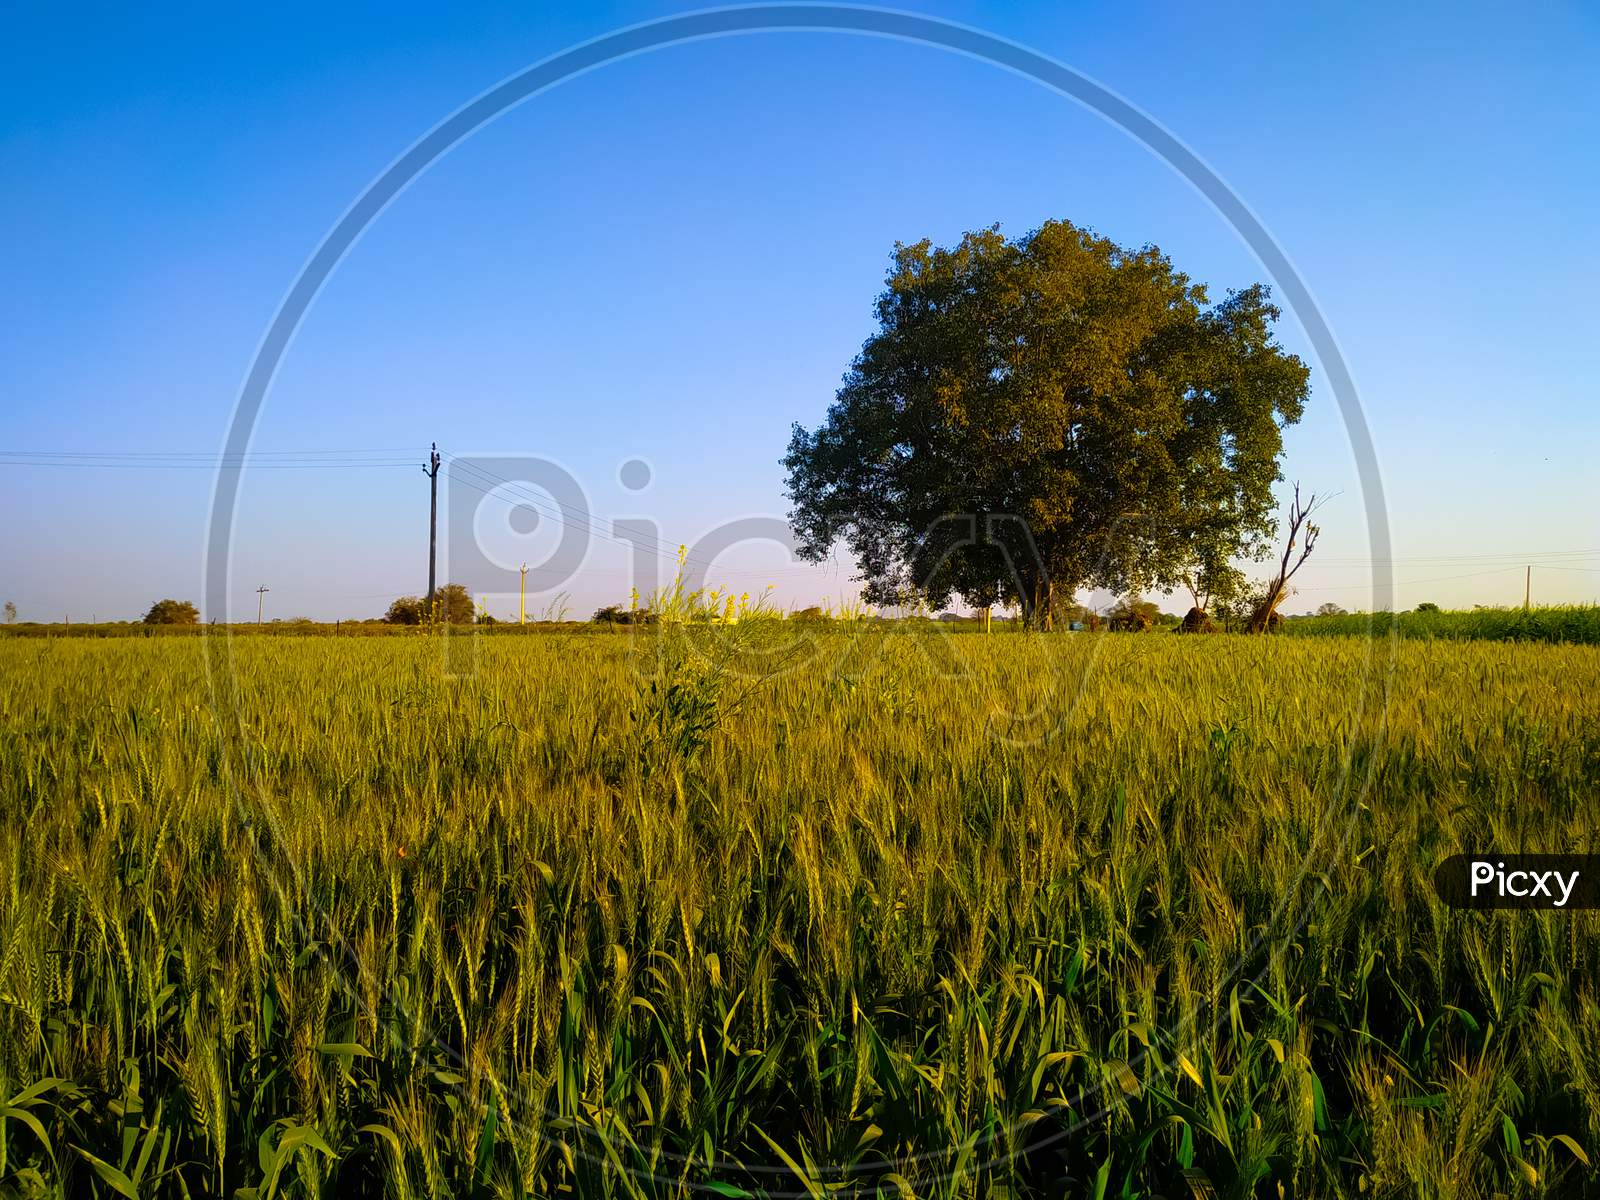 Bodhi Tree In A Field Of Wheat Shoots Against A Clear Blue Sky